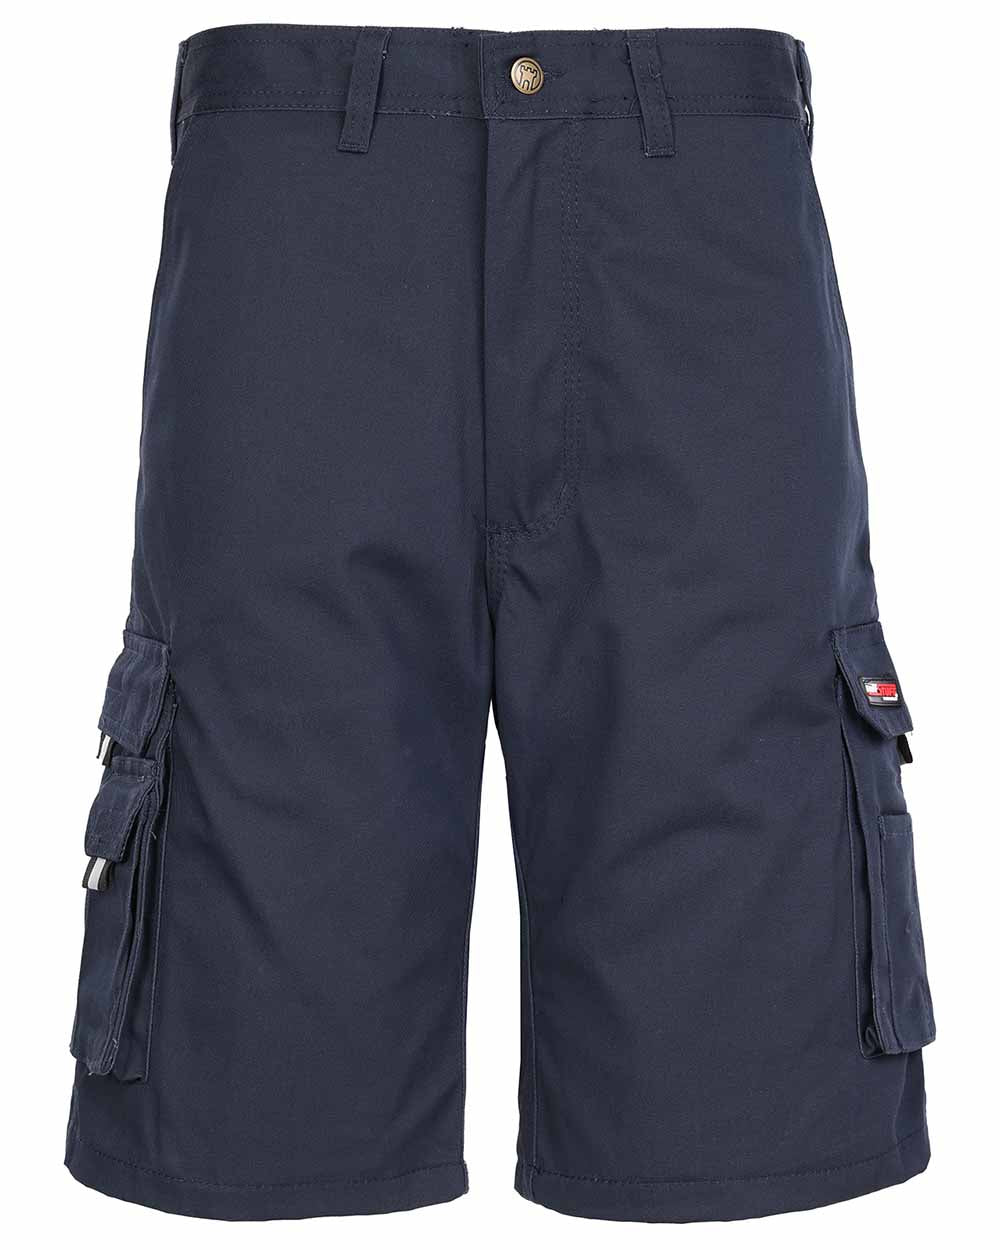 Navy Blue Coloured TuffStuff Pro Work Shorts On A White Background 